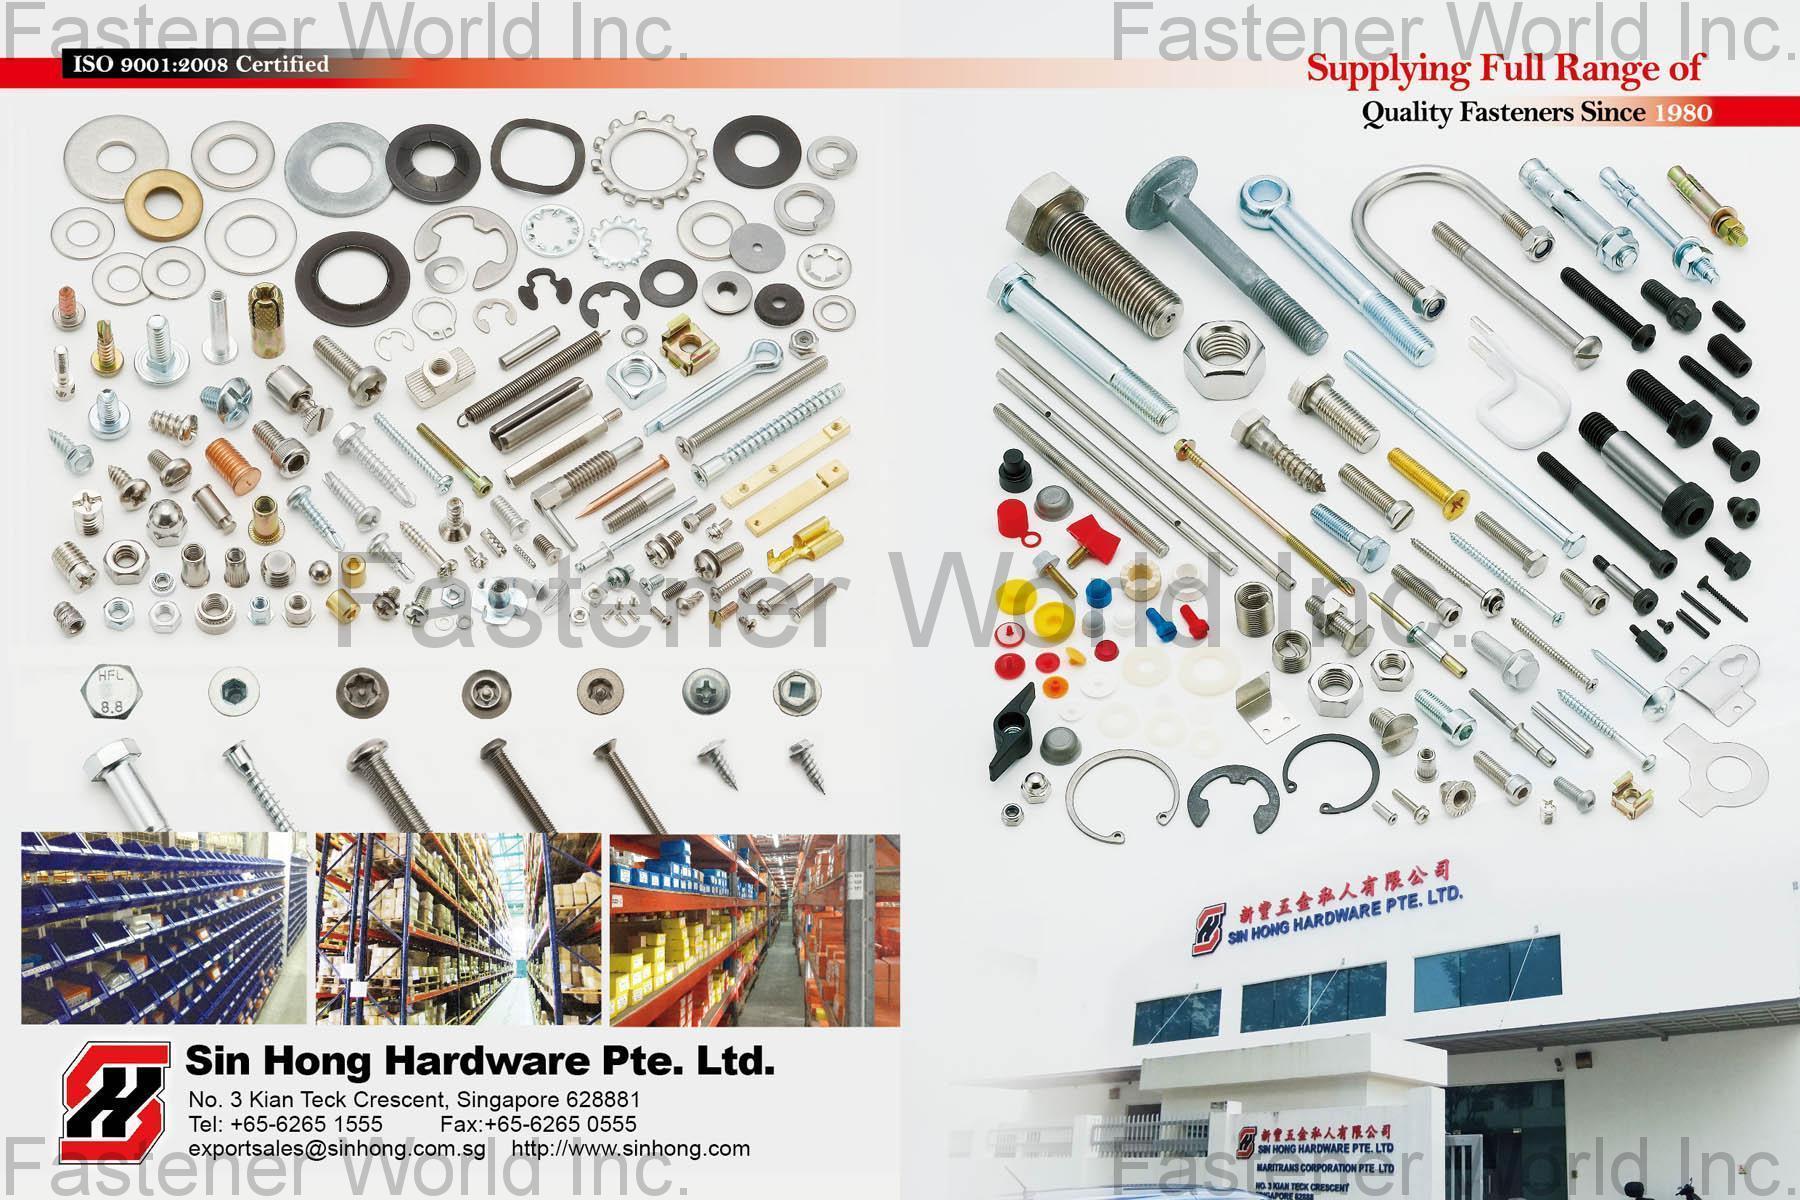 All Kinds of Screws,Stud Bolts,Machine Screws,Tapping Screws,All Kinds Of Nuts,Washers